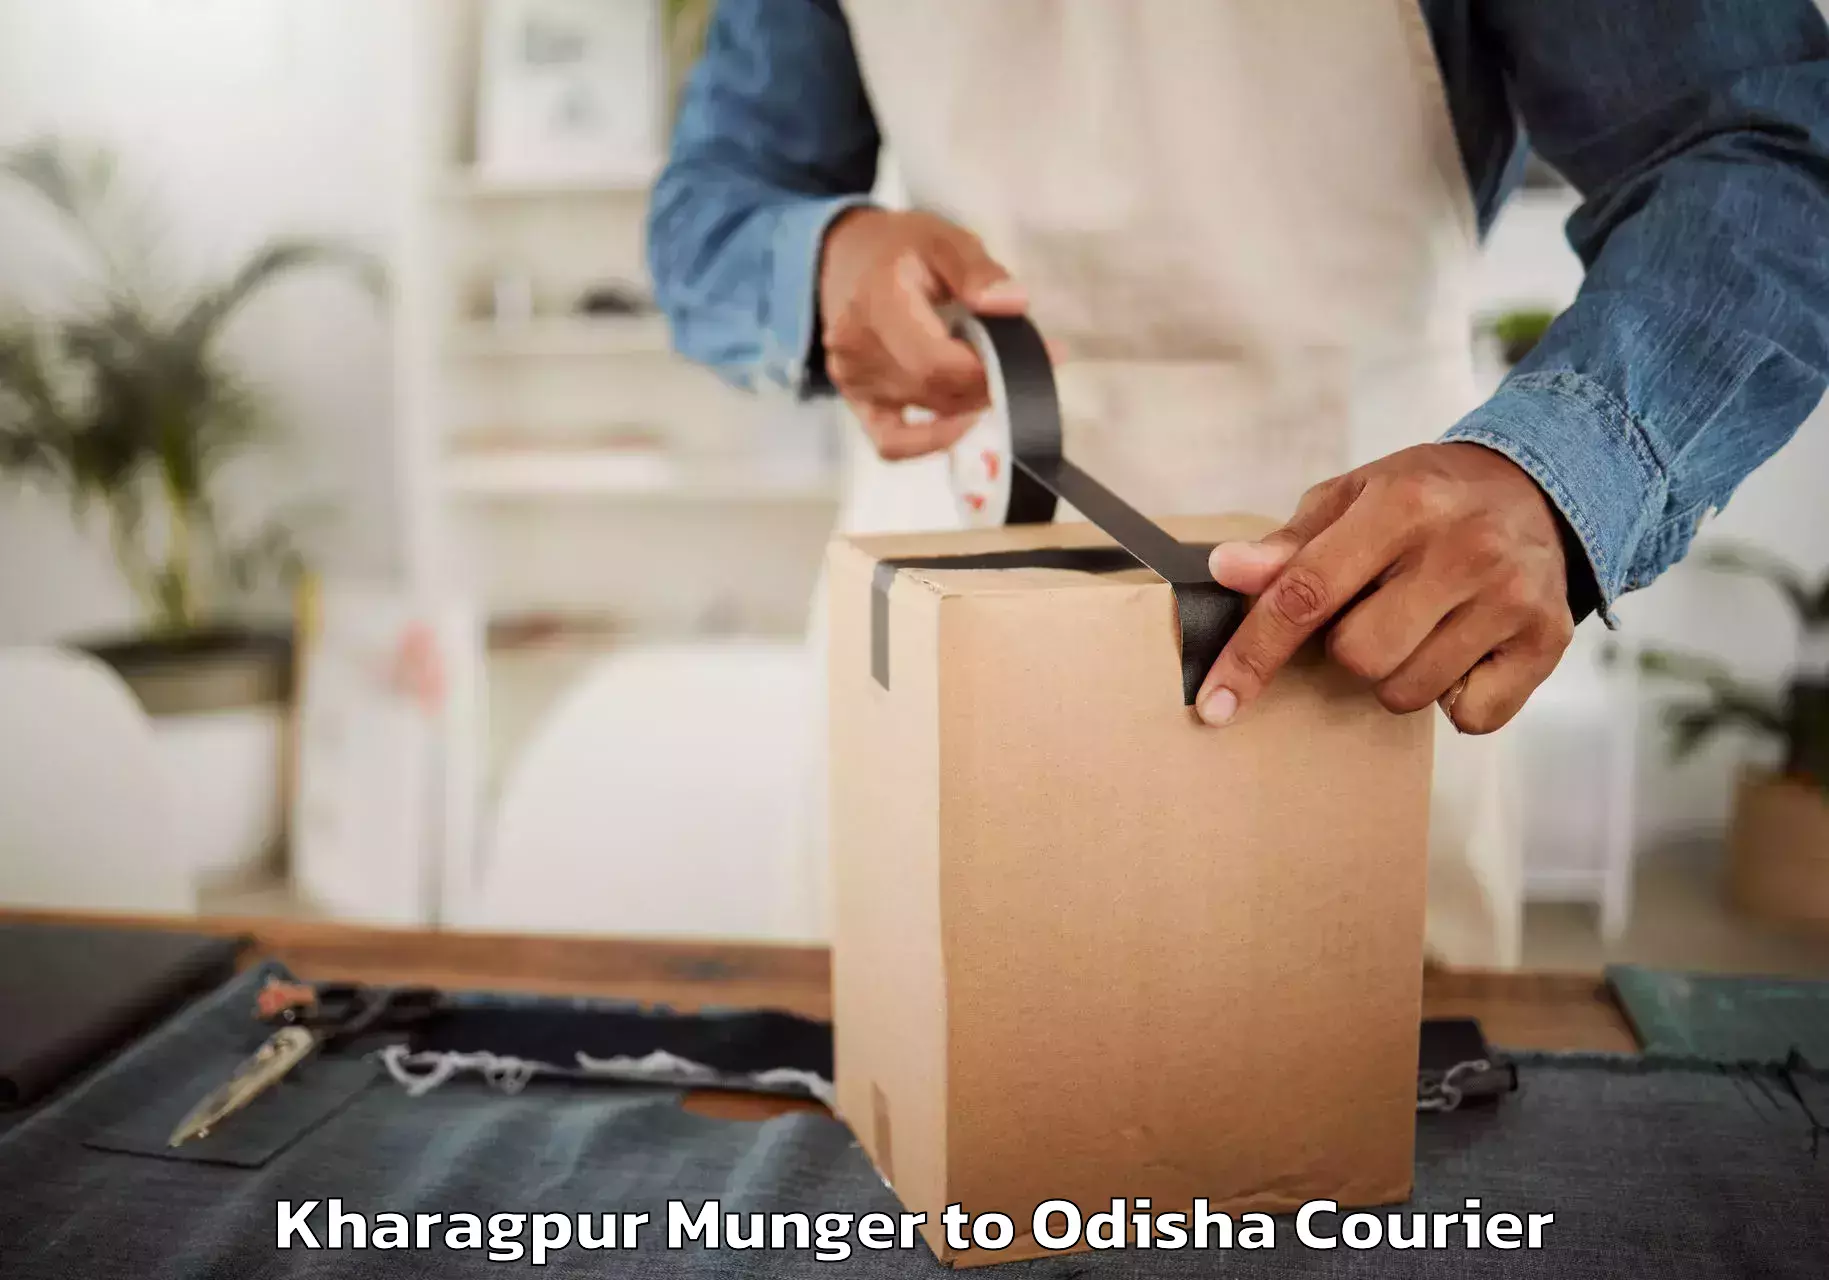 Professional movers and packers Kharagpur Munger to Odisha